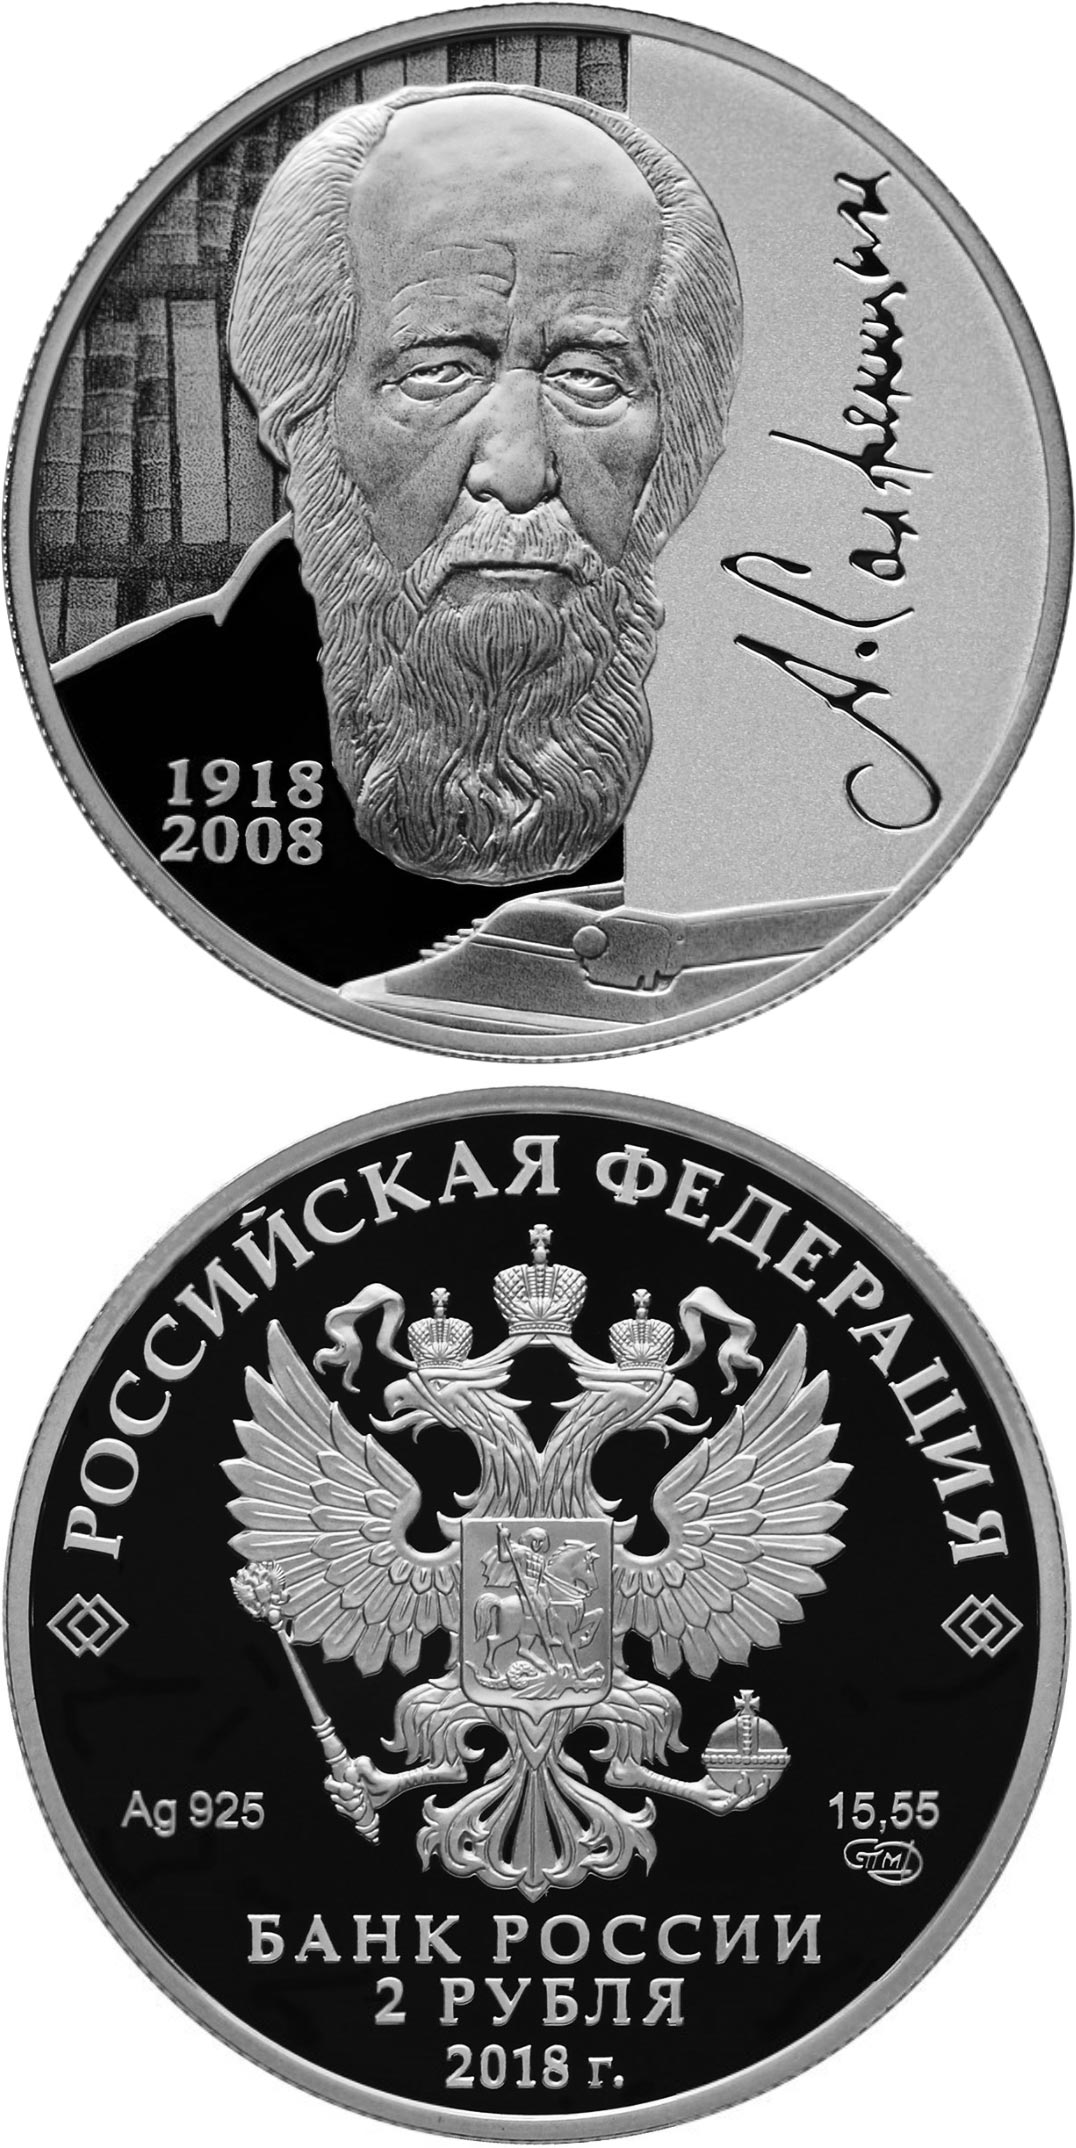 Image of 2 rubles coin - Writer A.I. Solzhenitsyn, the Centenary of the Birthday | Russia 2018.  The Silver coin is of Proof quality.